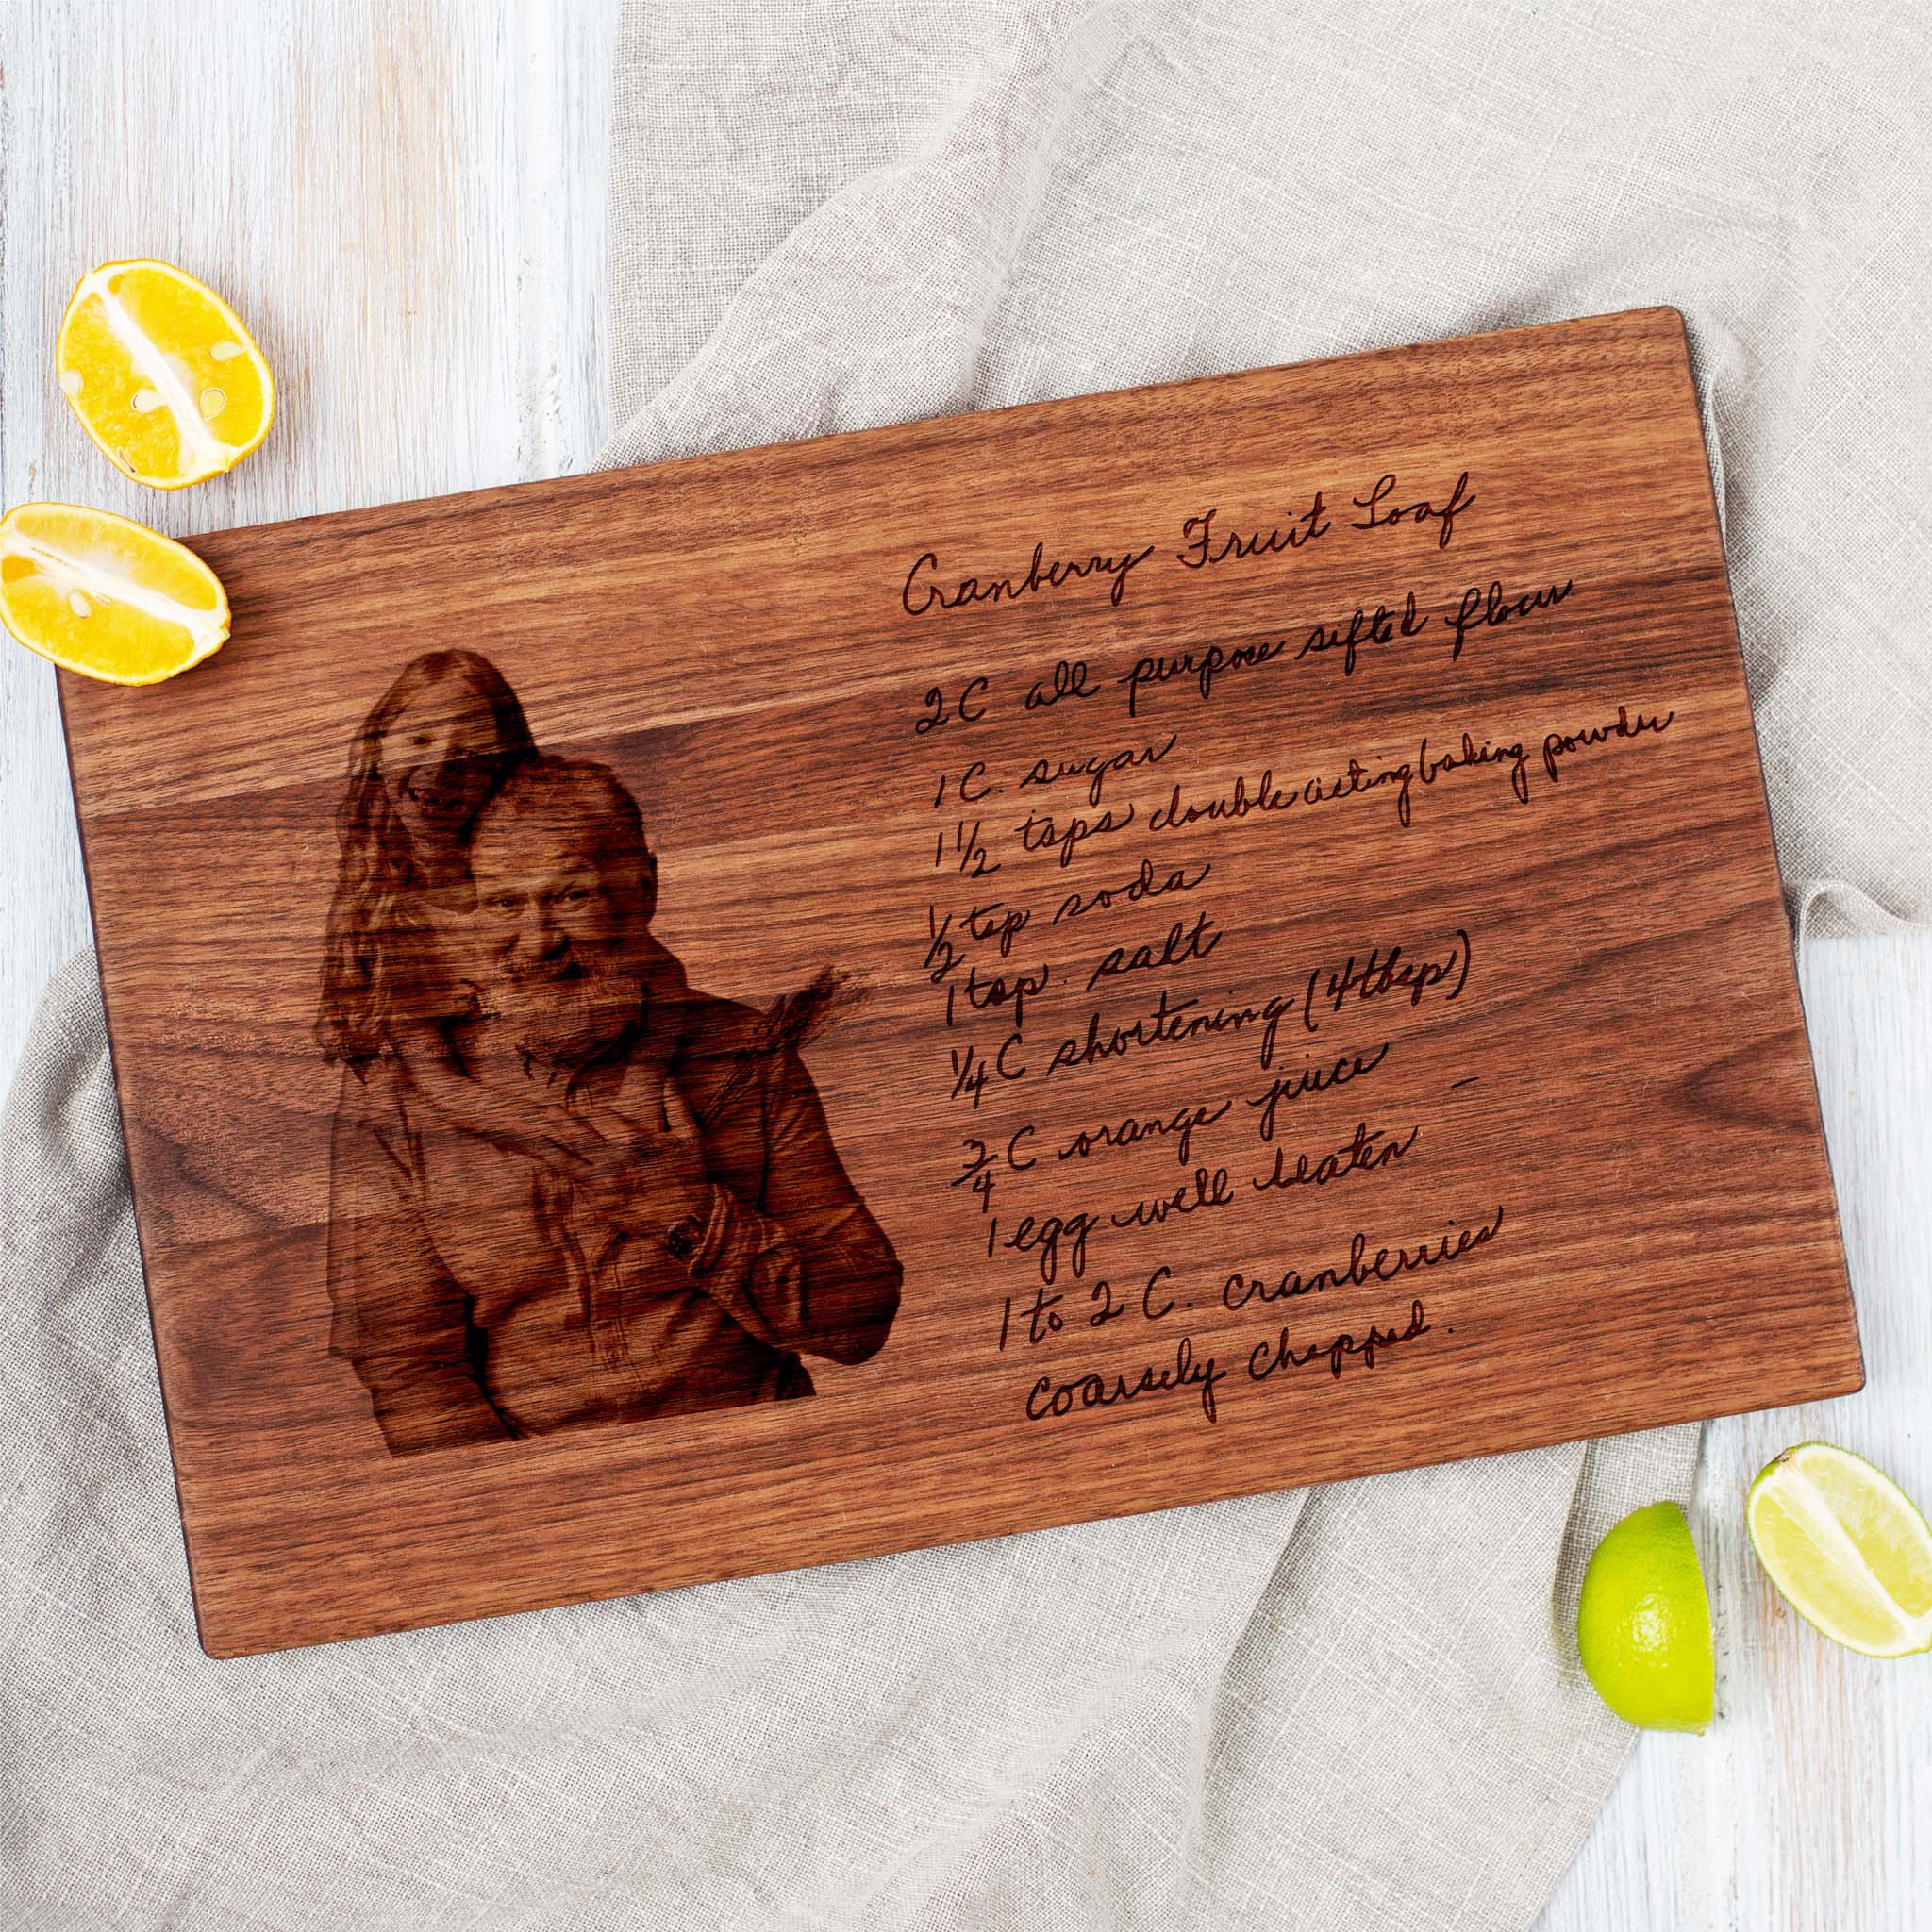 A handwritten recipe cutting board with an engraved family image.